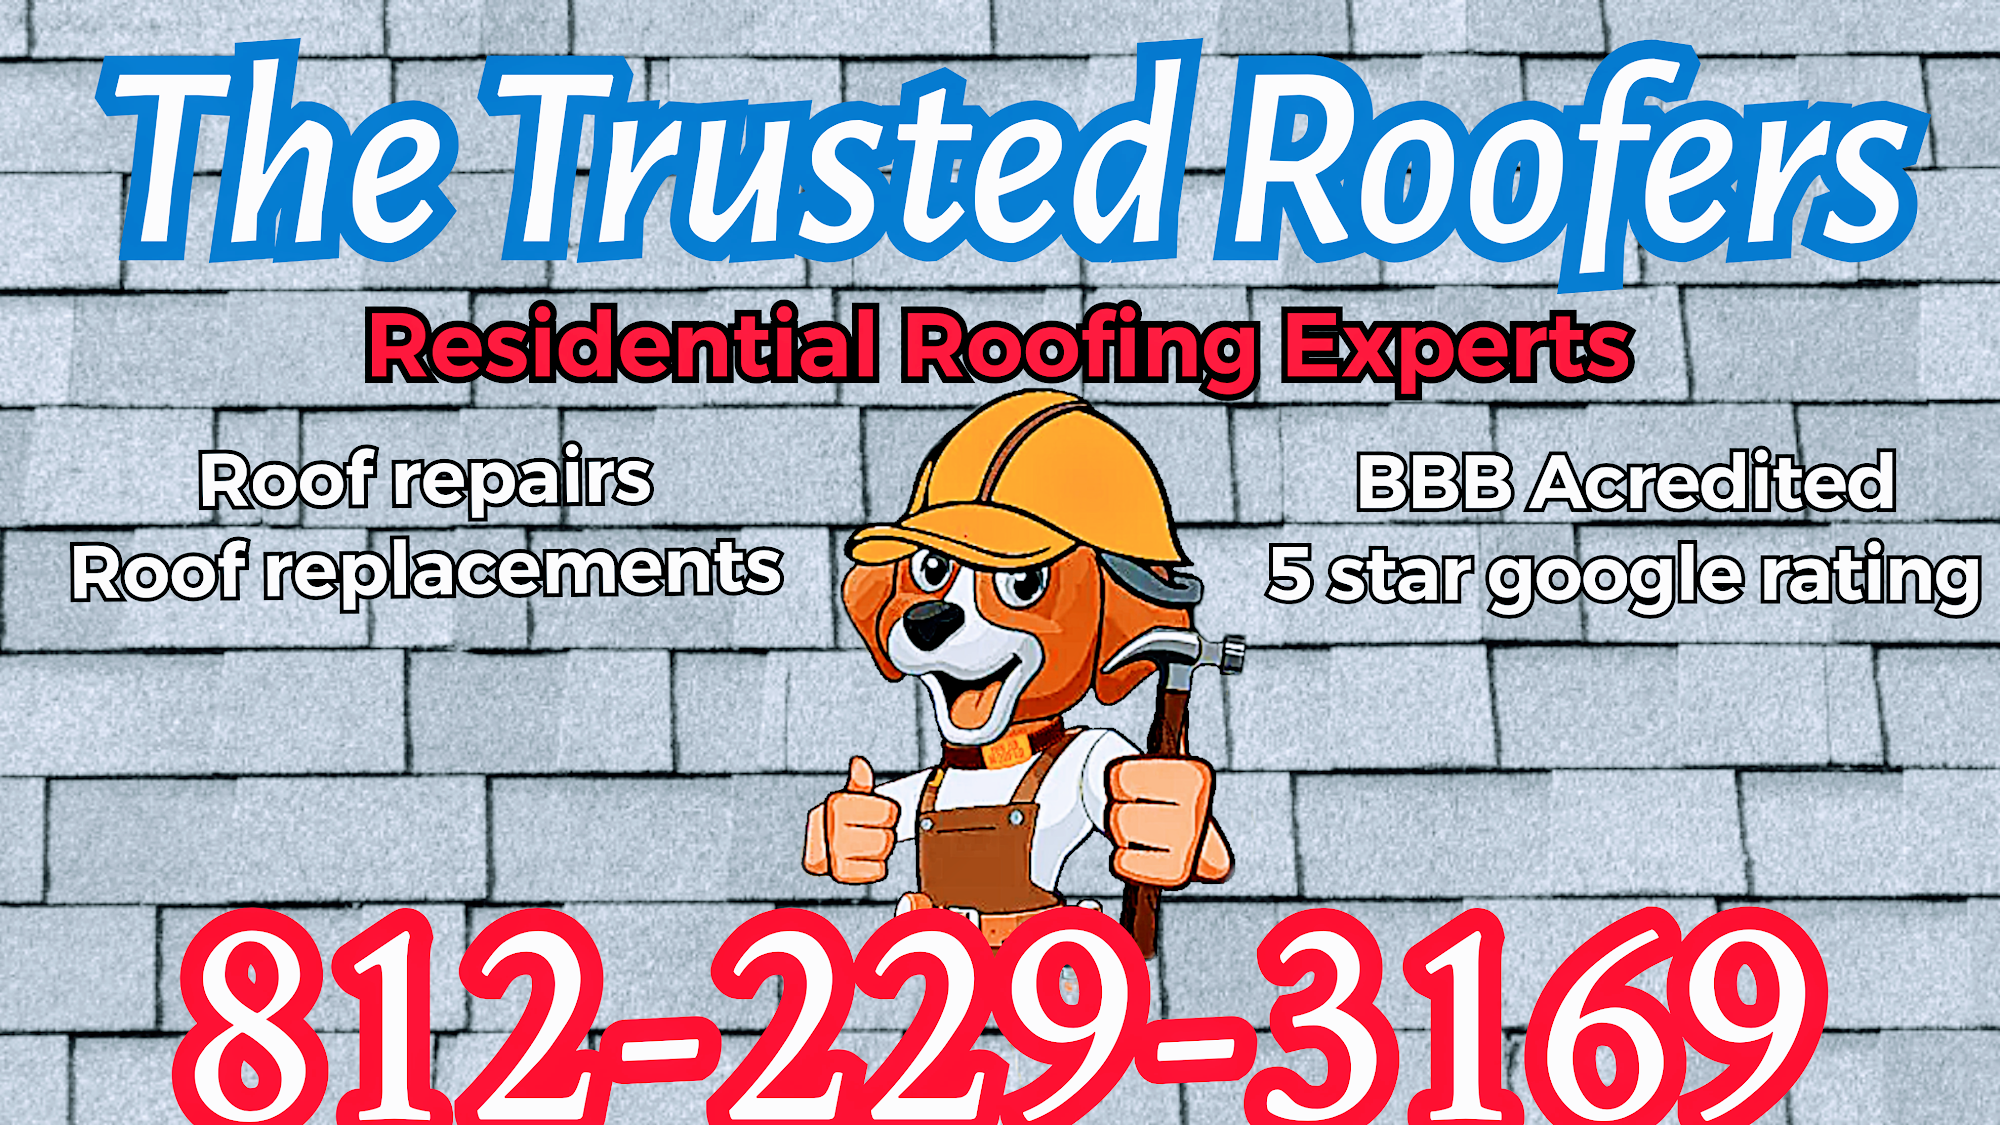 The Trusted Roofers 628 S 7th St, Clinton Indiana 47842